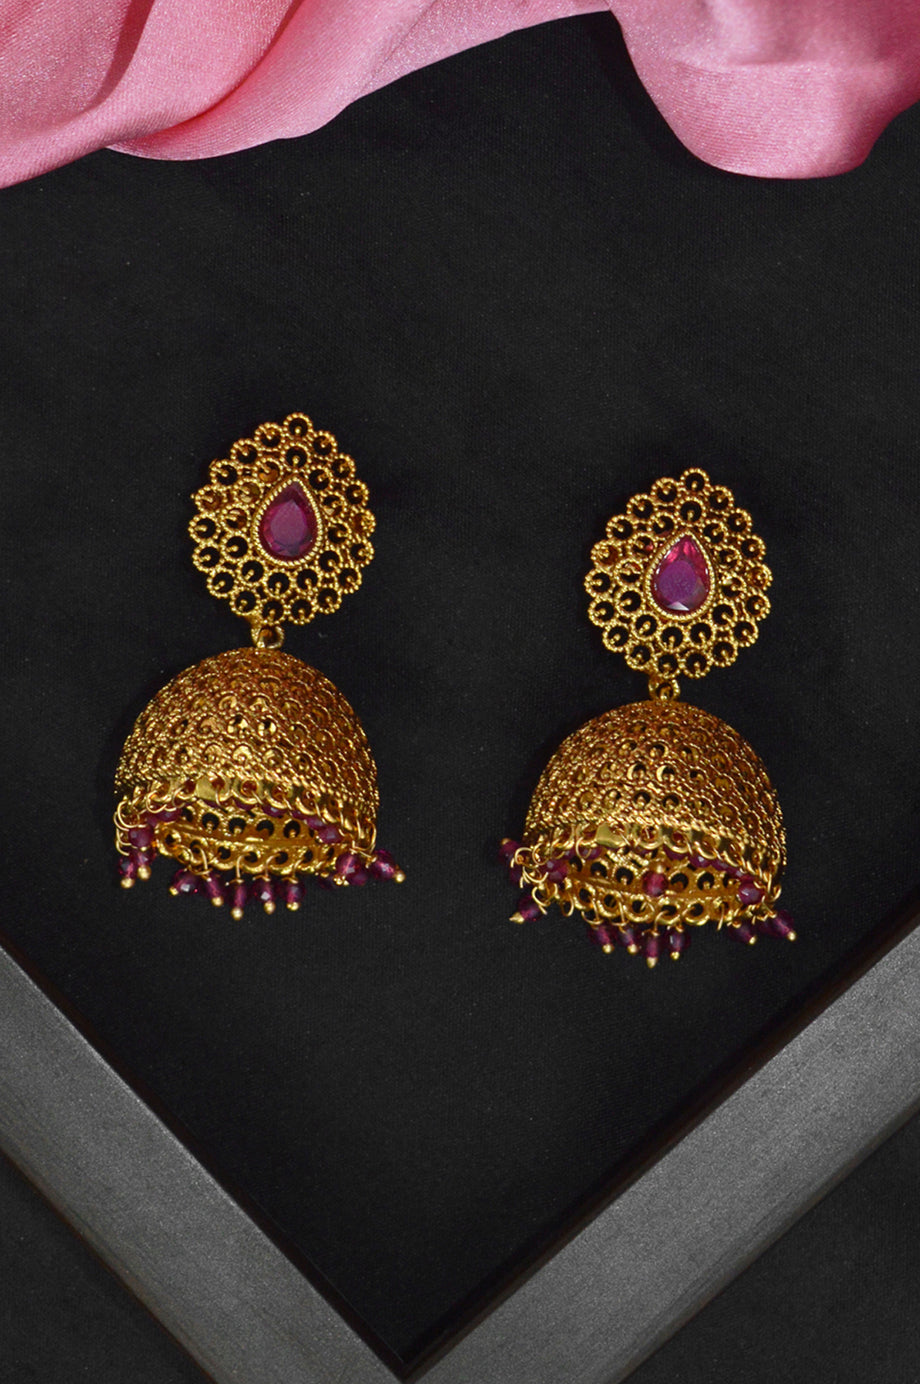 Buy Marriage Gold Earrings Jhumka Design Gold Plated Jewellery